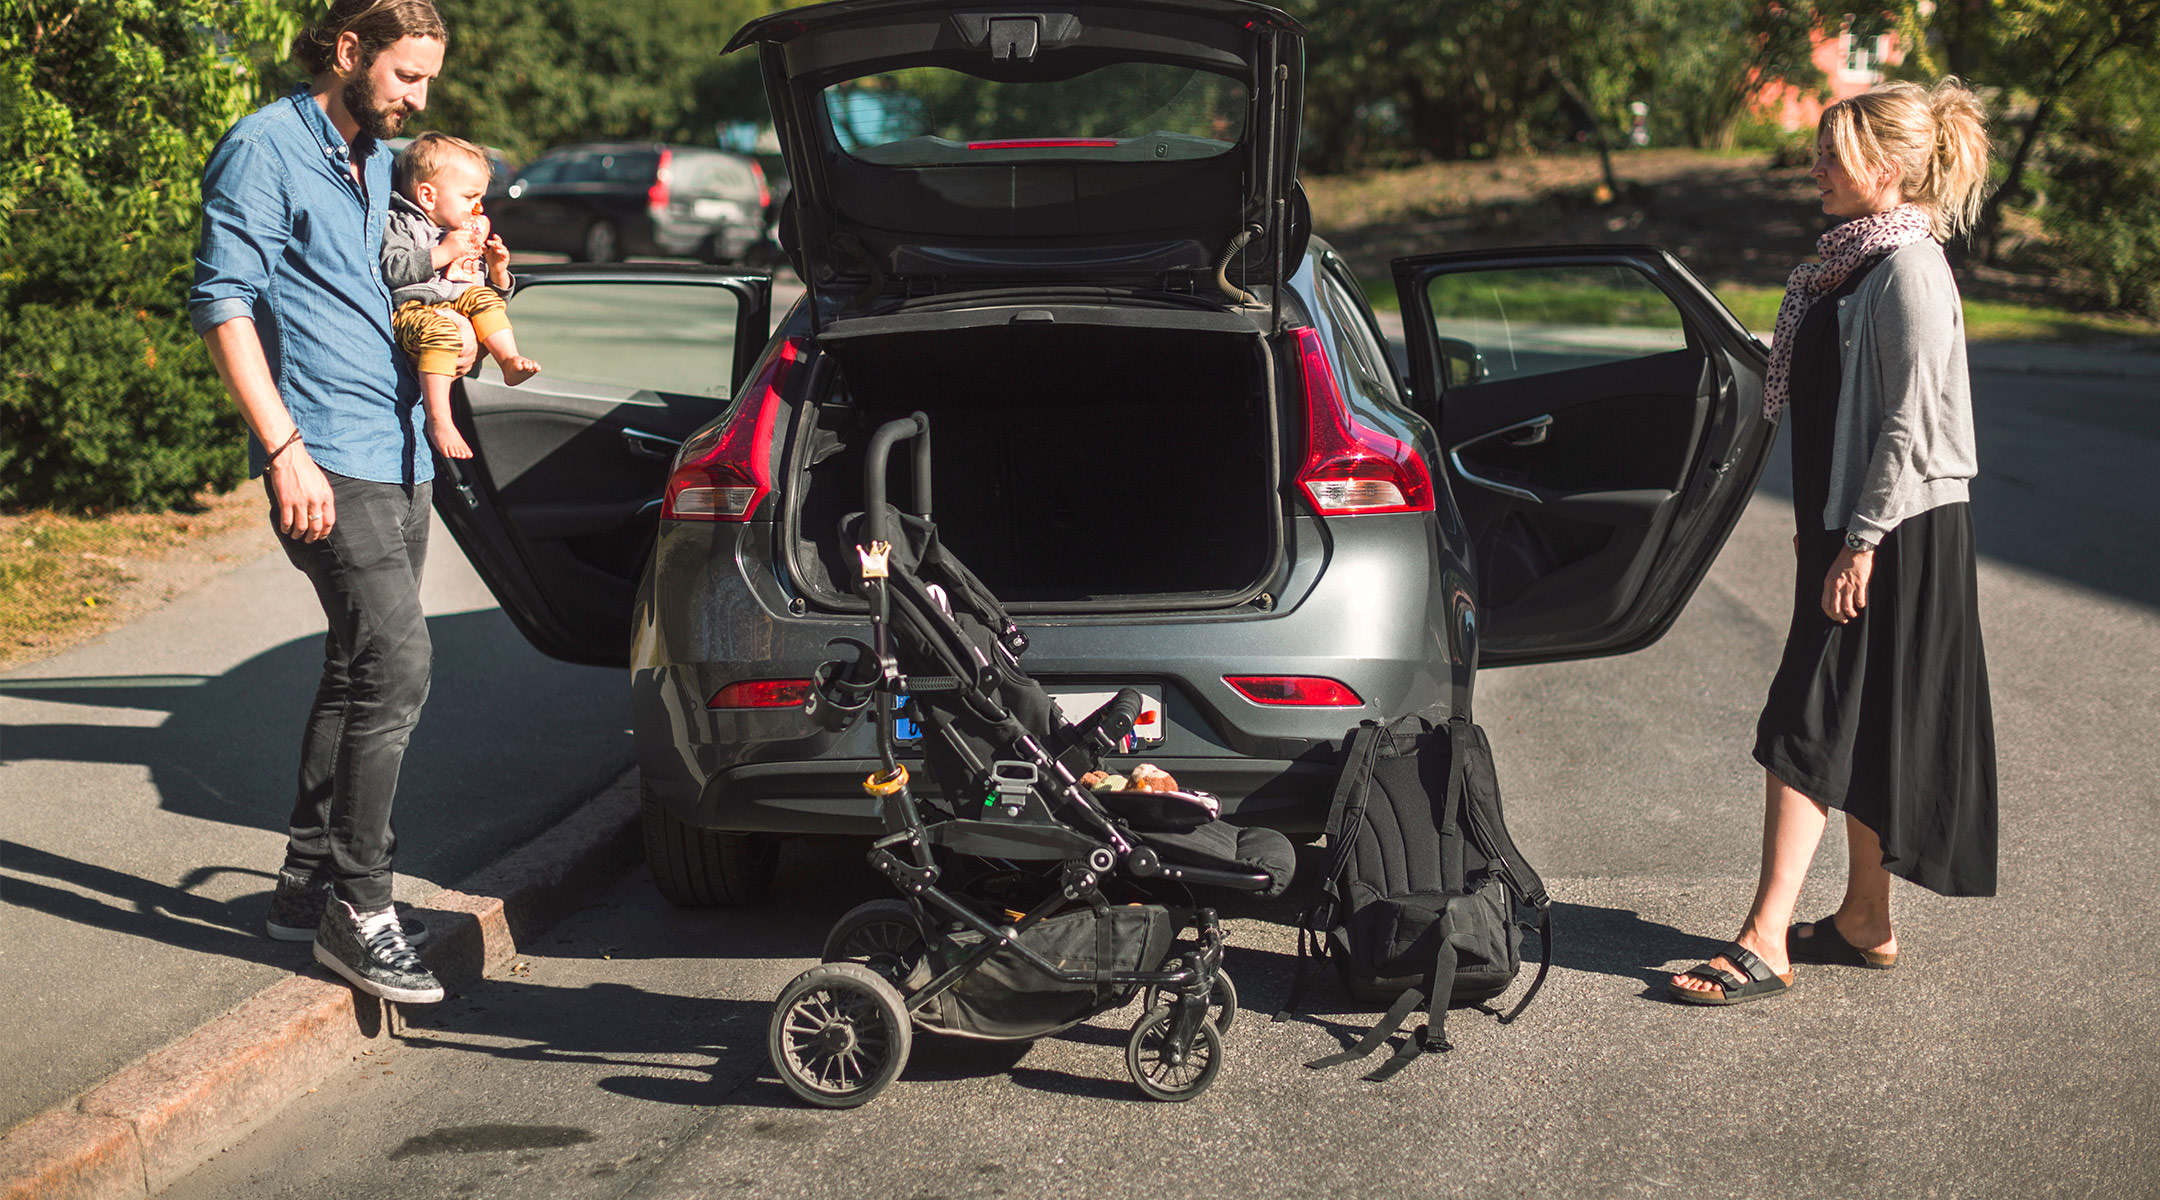 parents getting ready to put baby and stroller in their car